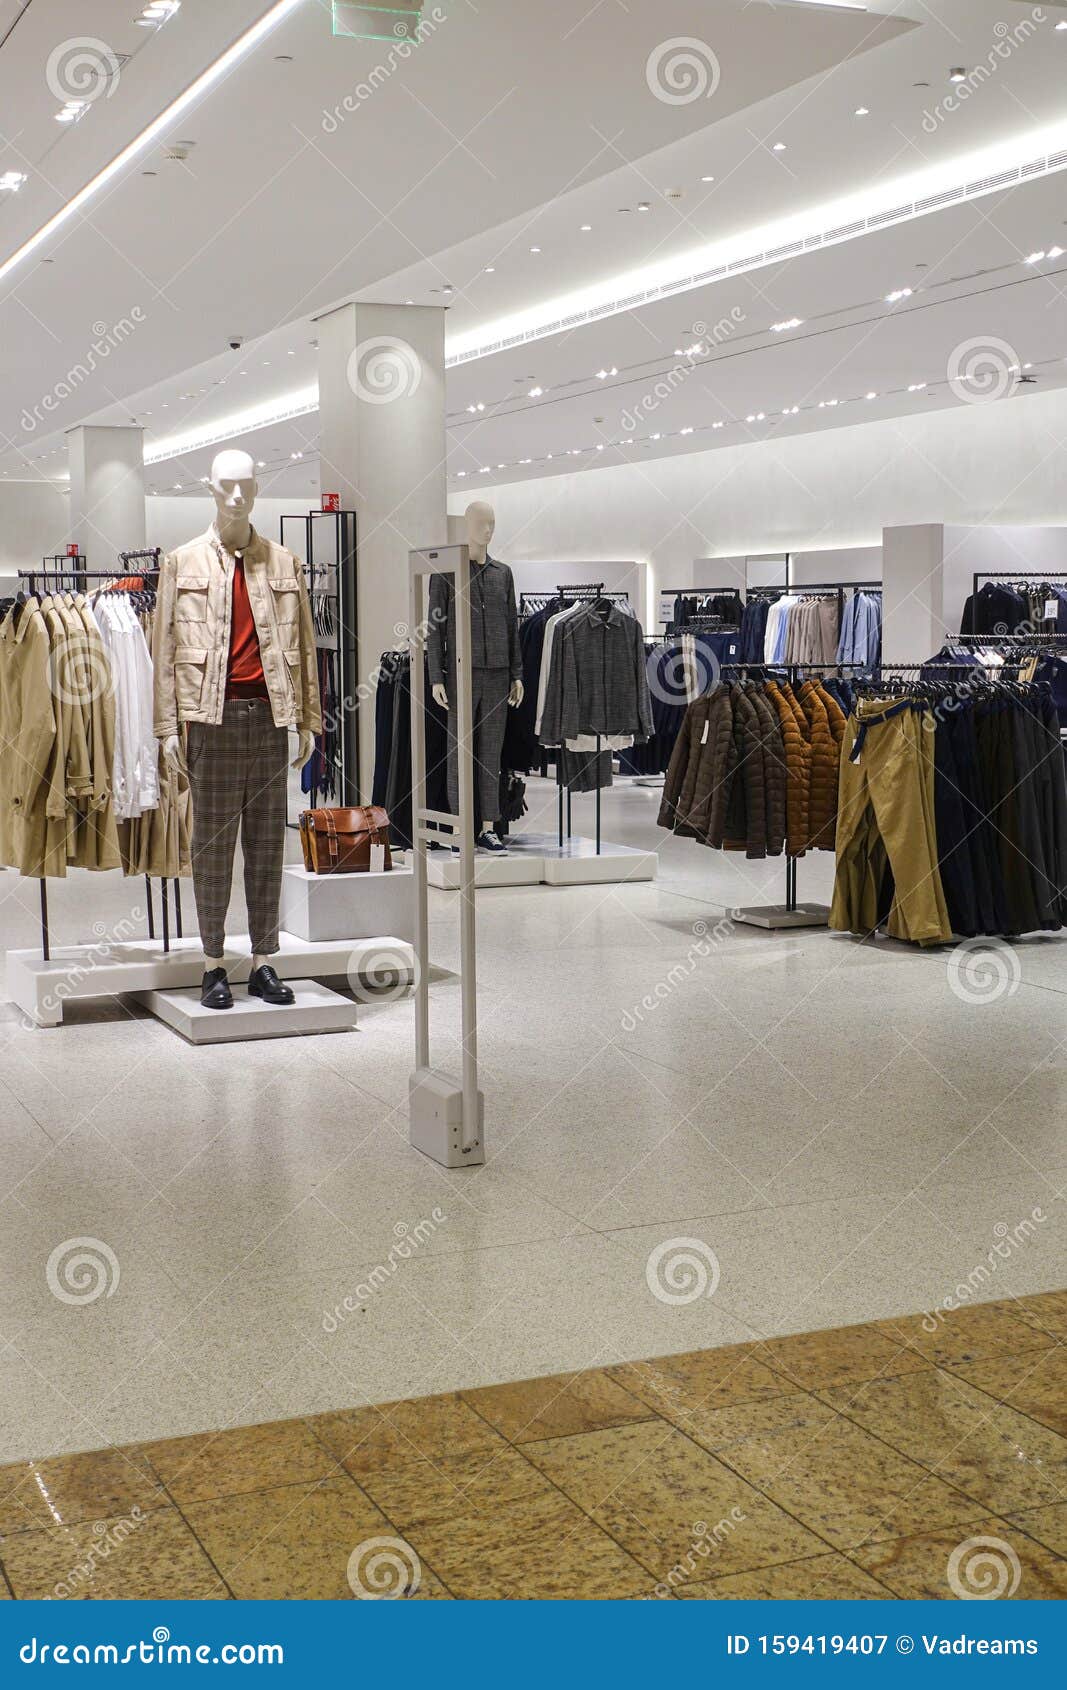 Modern Fashionable Brand Interior of Clothing Store Inside Shopping Center  Stock Image - Image of construction, boutique: 159419407